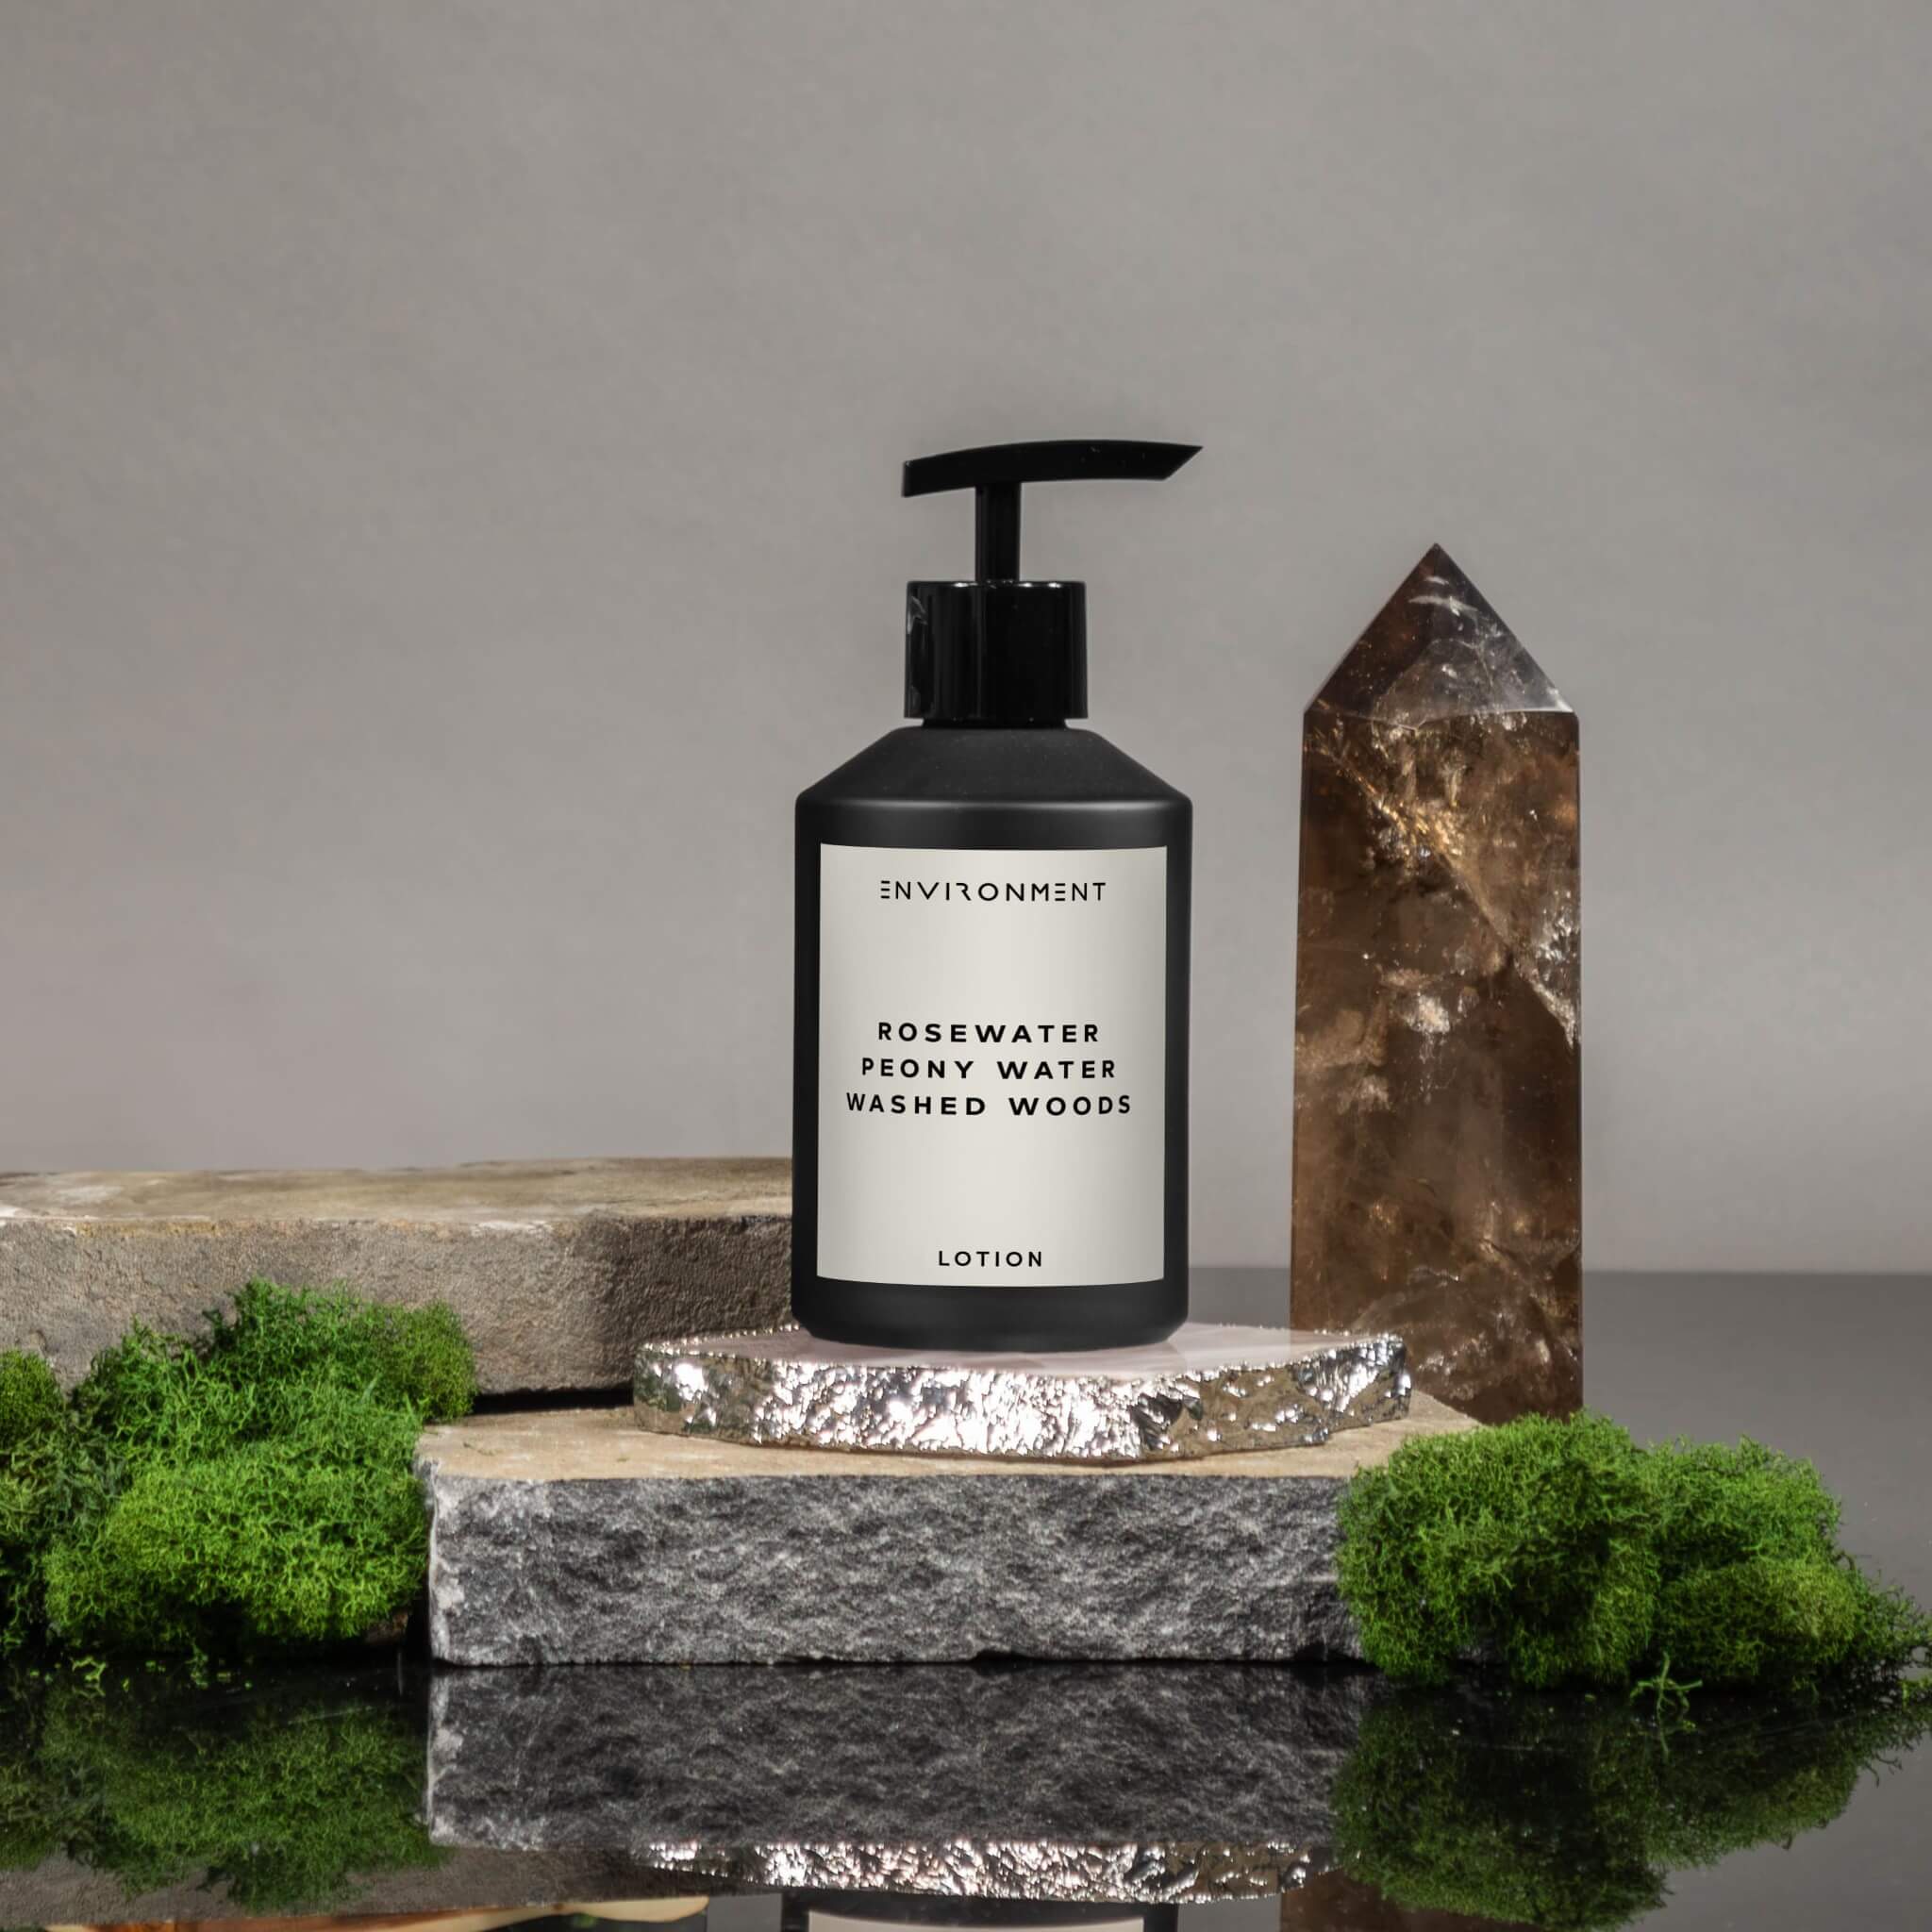 Rosewater | Peony Water | Washed Woods Lotion (Inspired by Issey Miyake L'Eau d'Issey®)